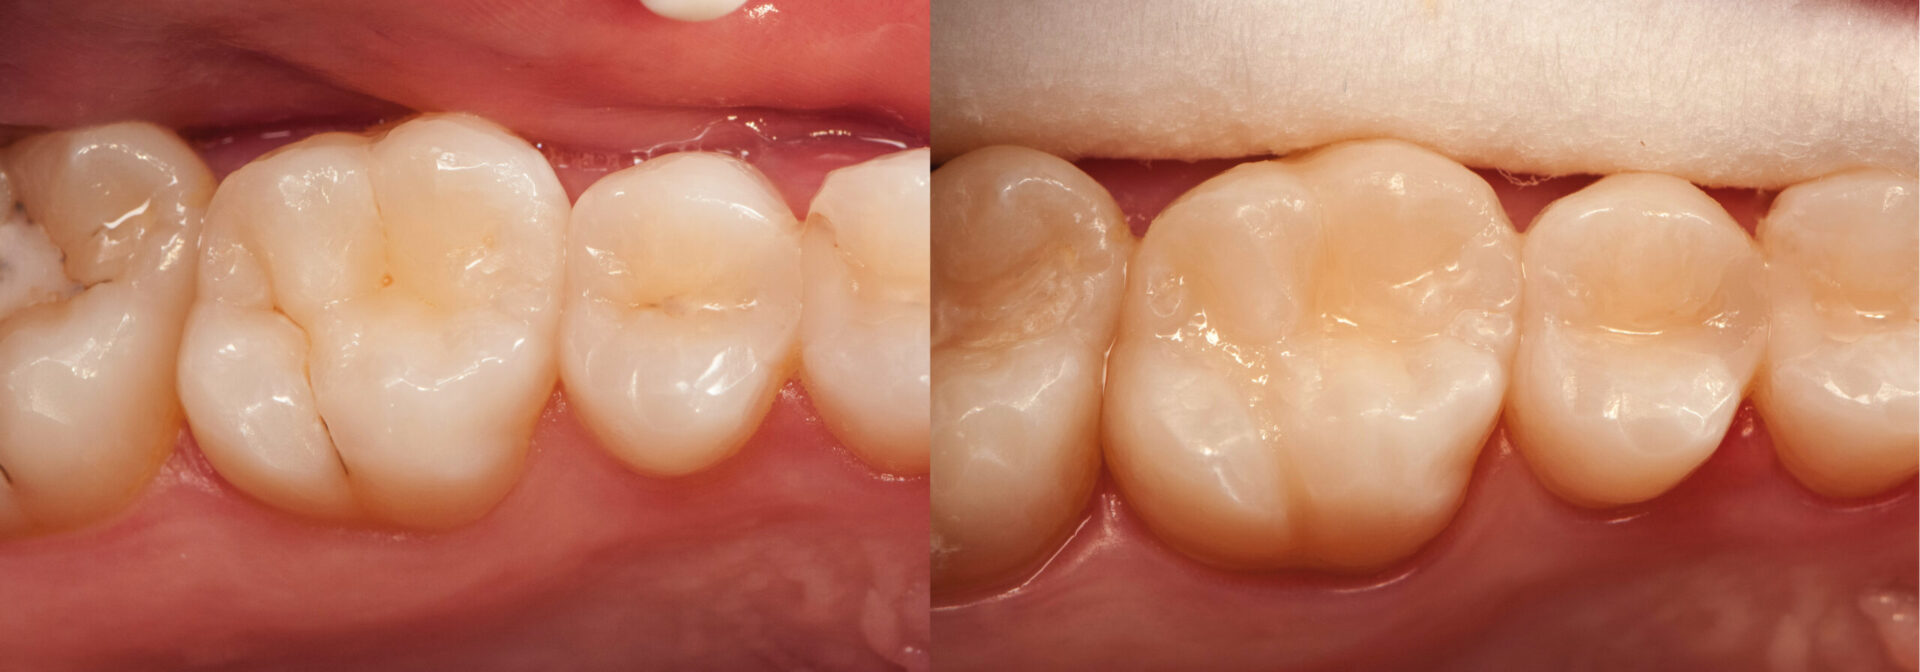 Before and after sealants